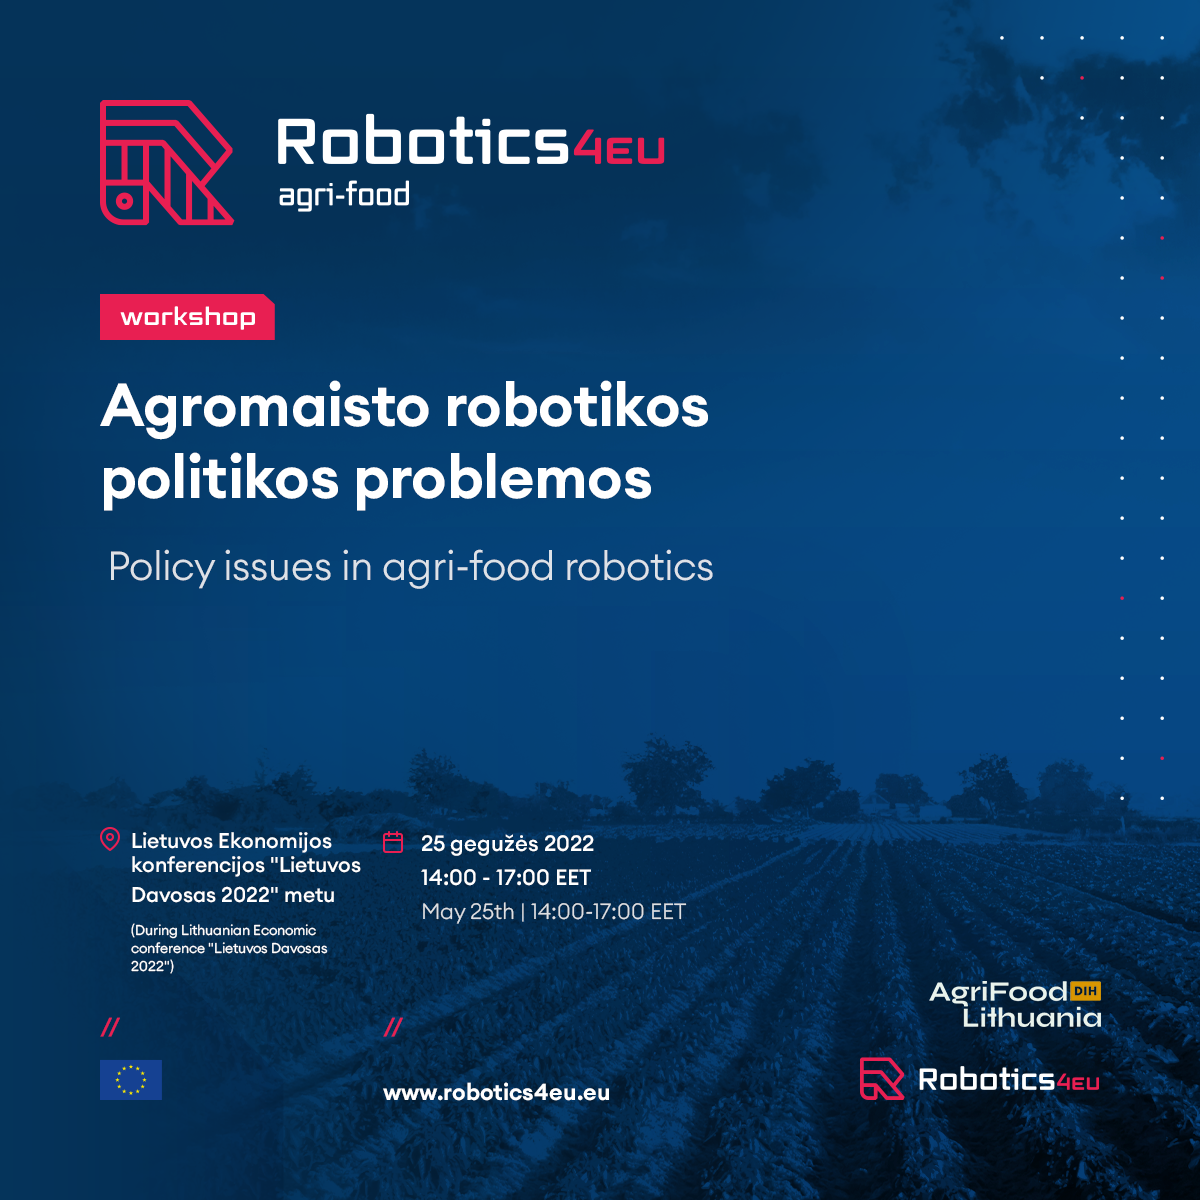 Policy issues in agri-food robotics